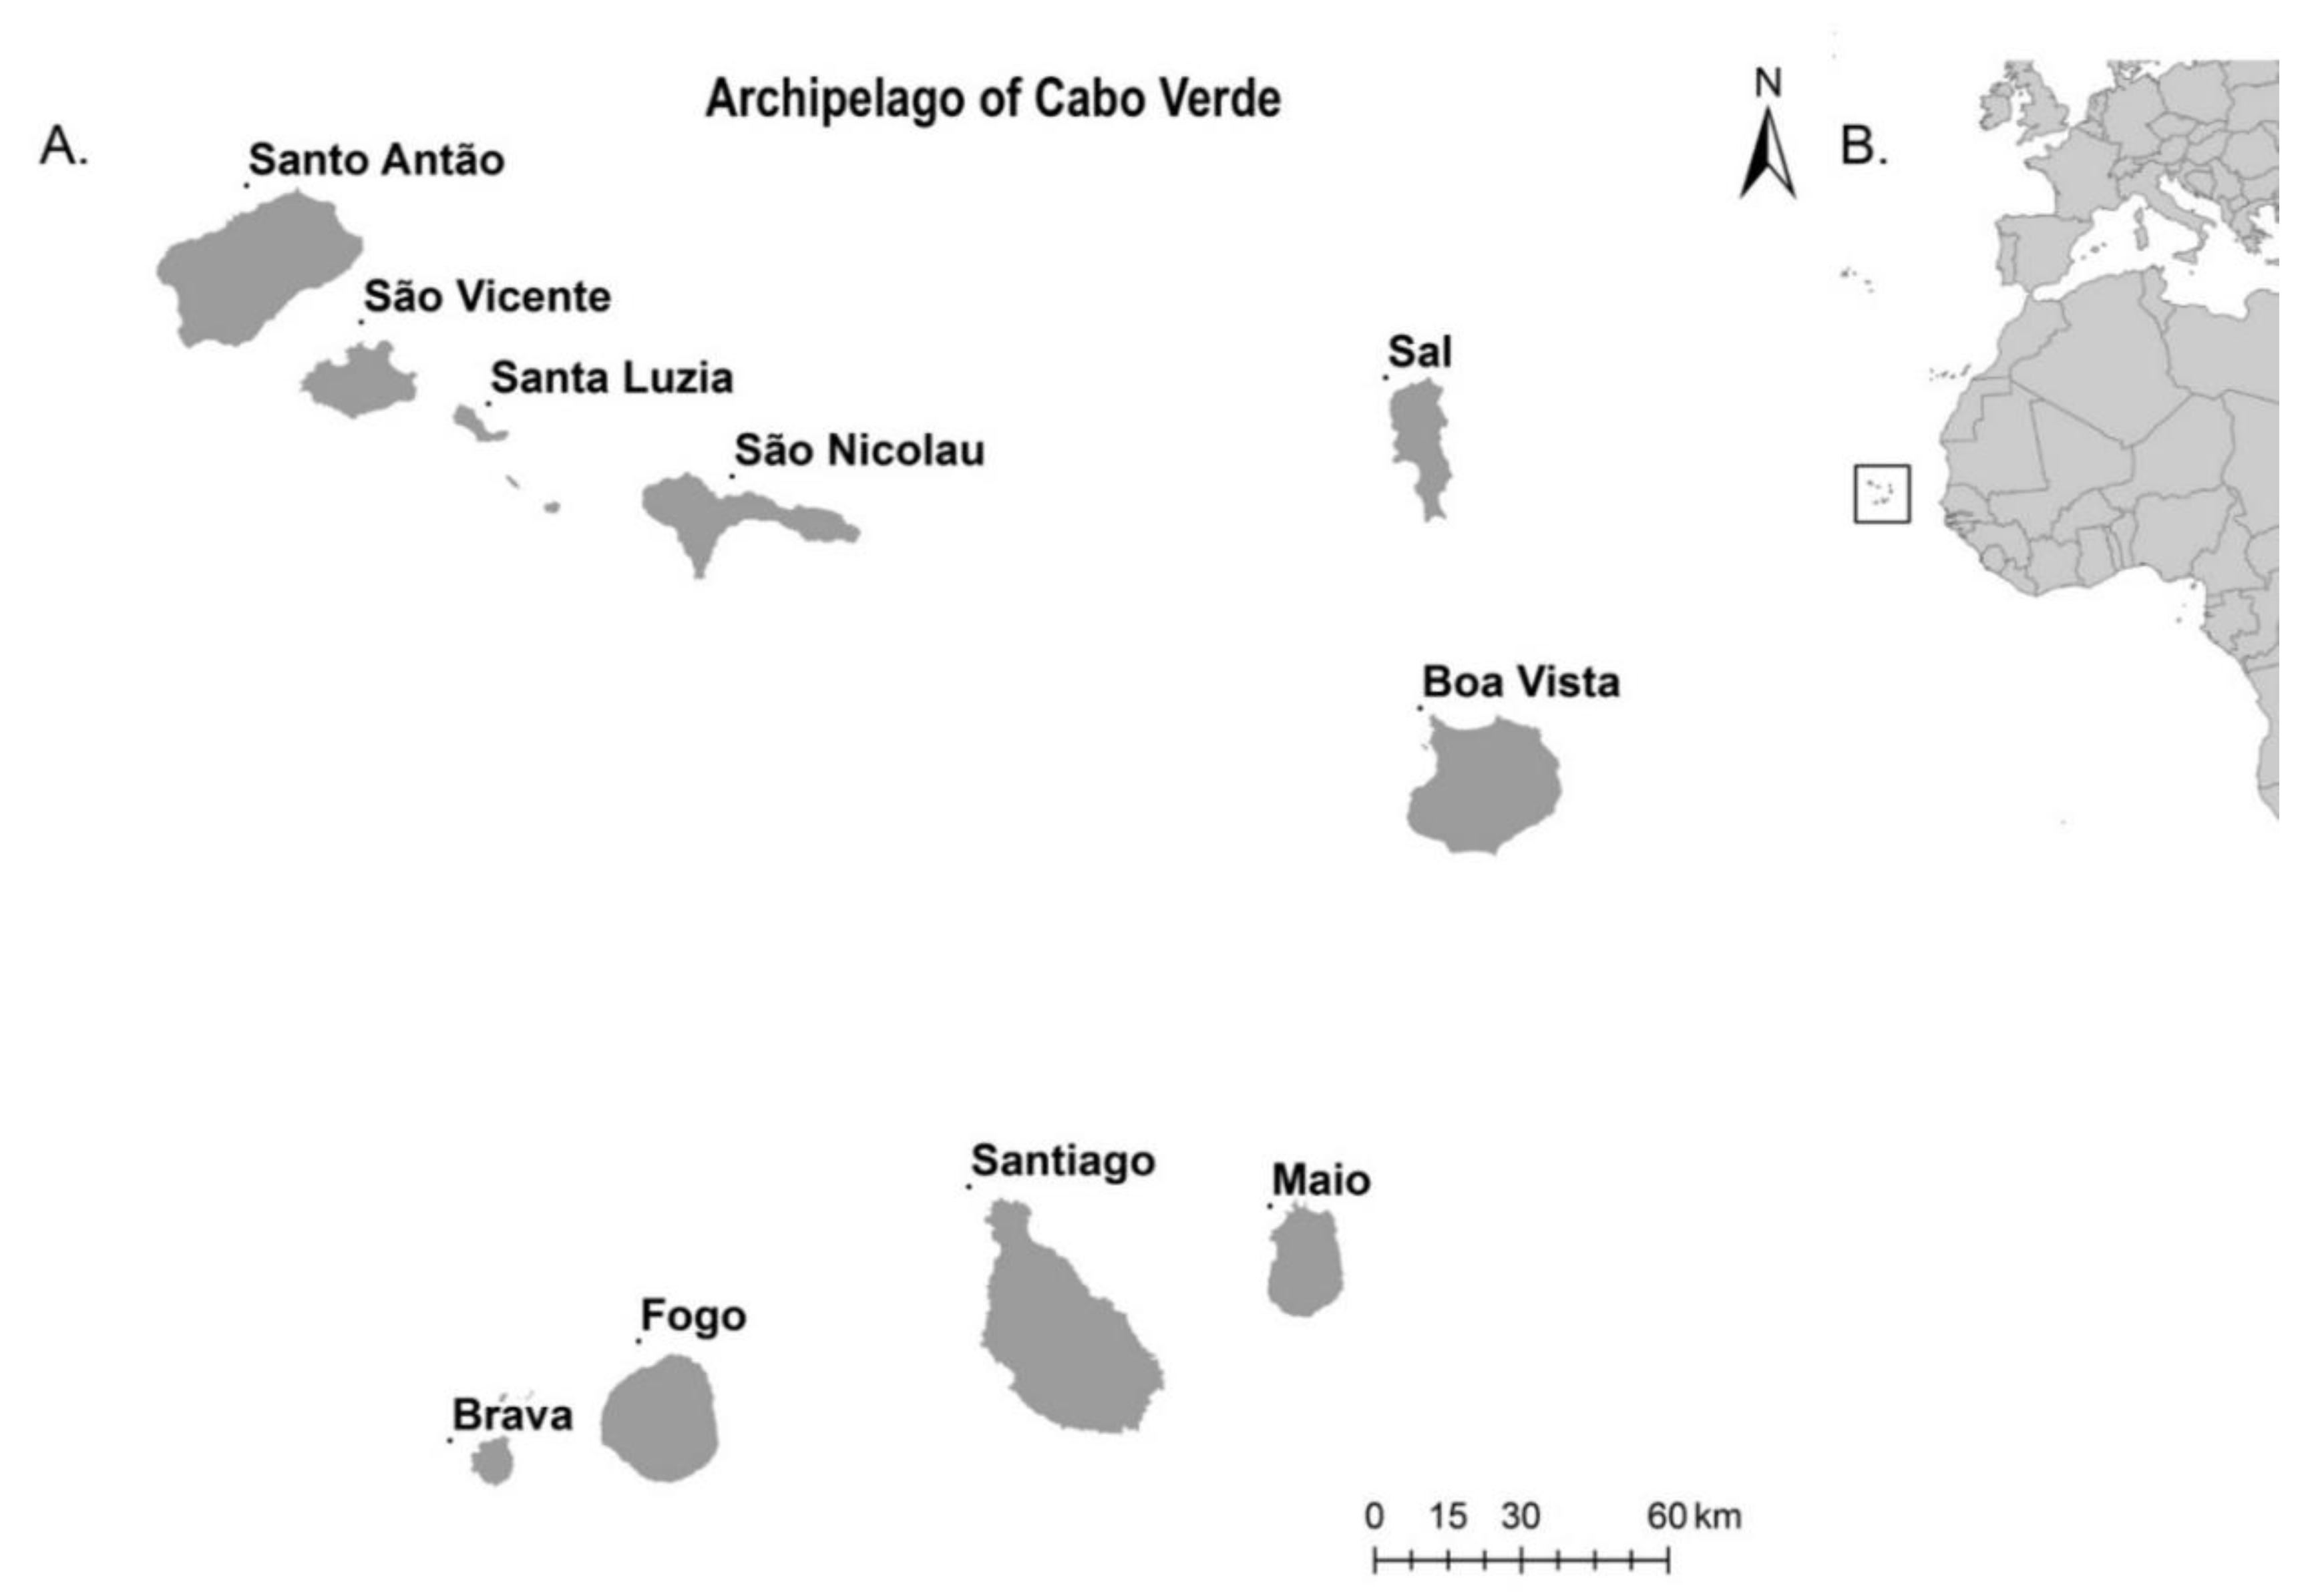 | Free Full-Text | Abundance and Updated of Aedes aegypti (Diptera: Culicidae) Cabo Verde Archipelago: A Neglected Threat to Public Health